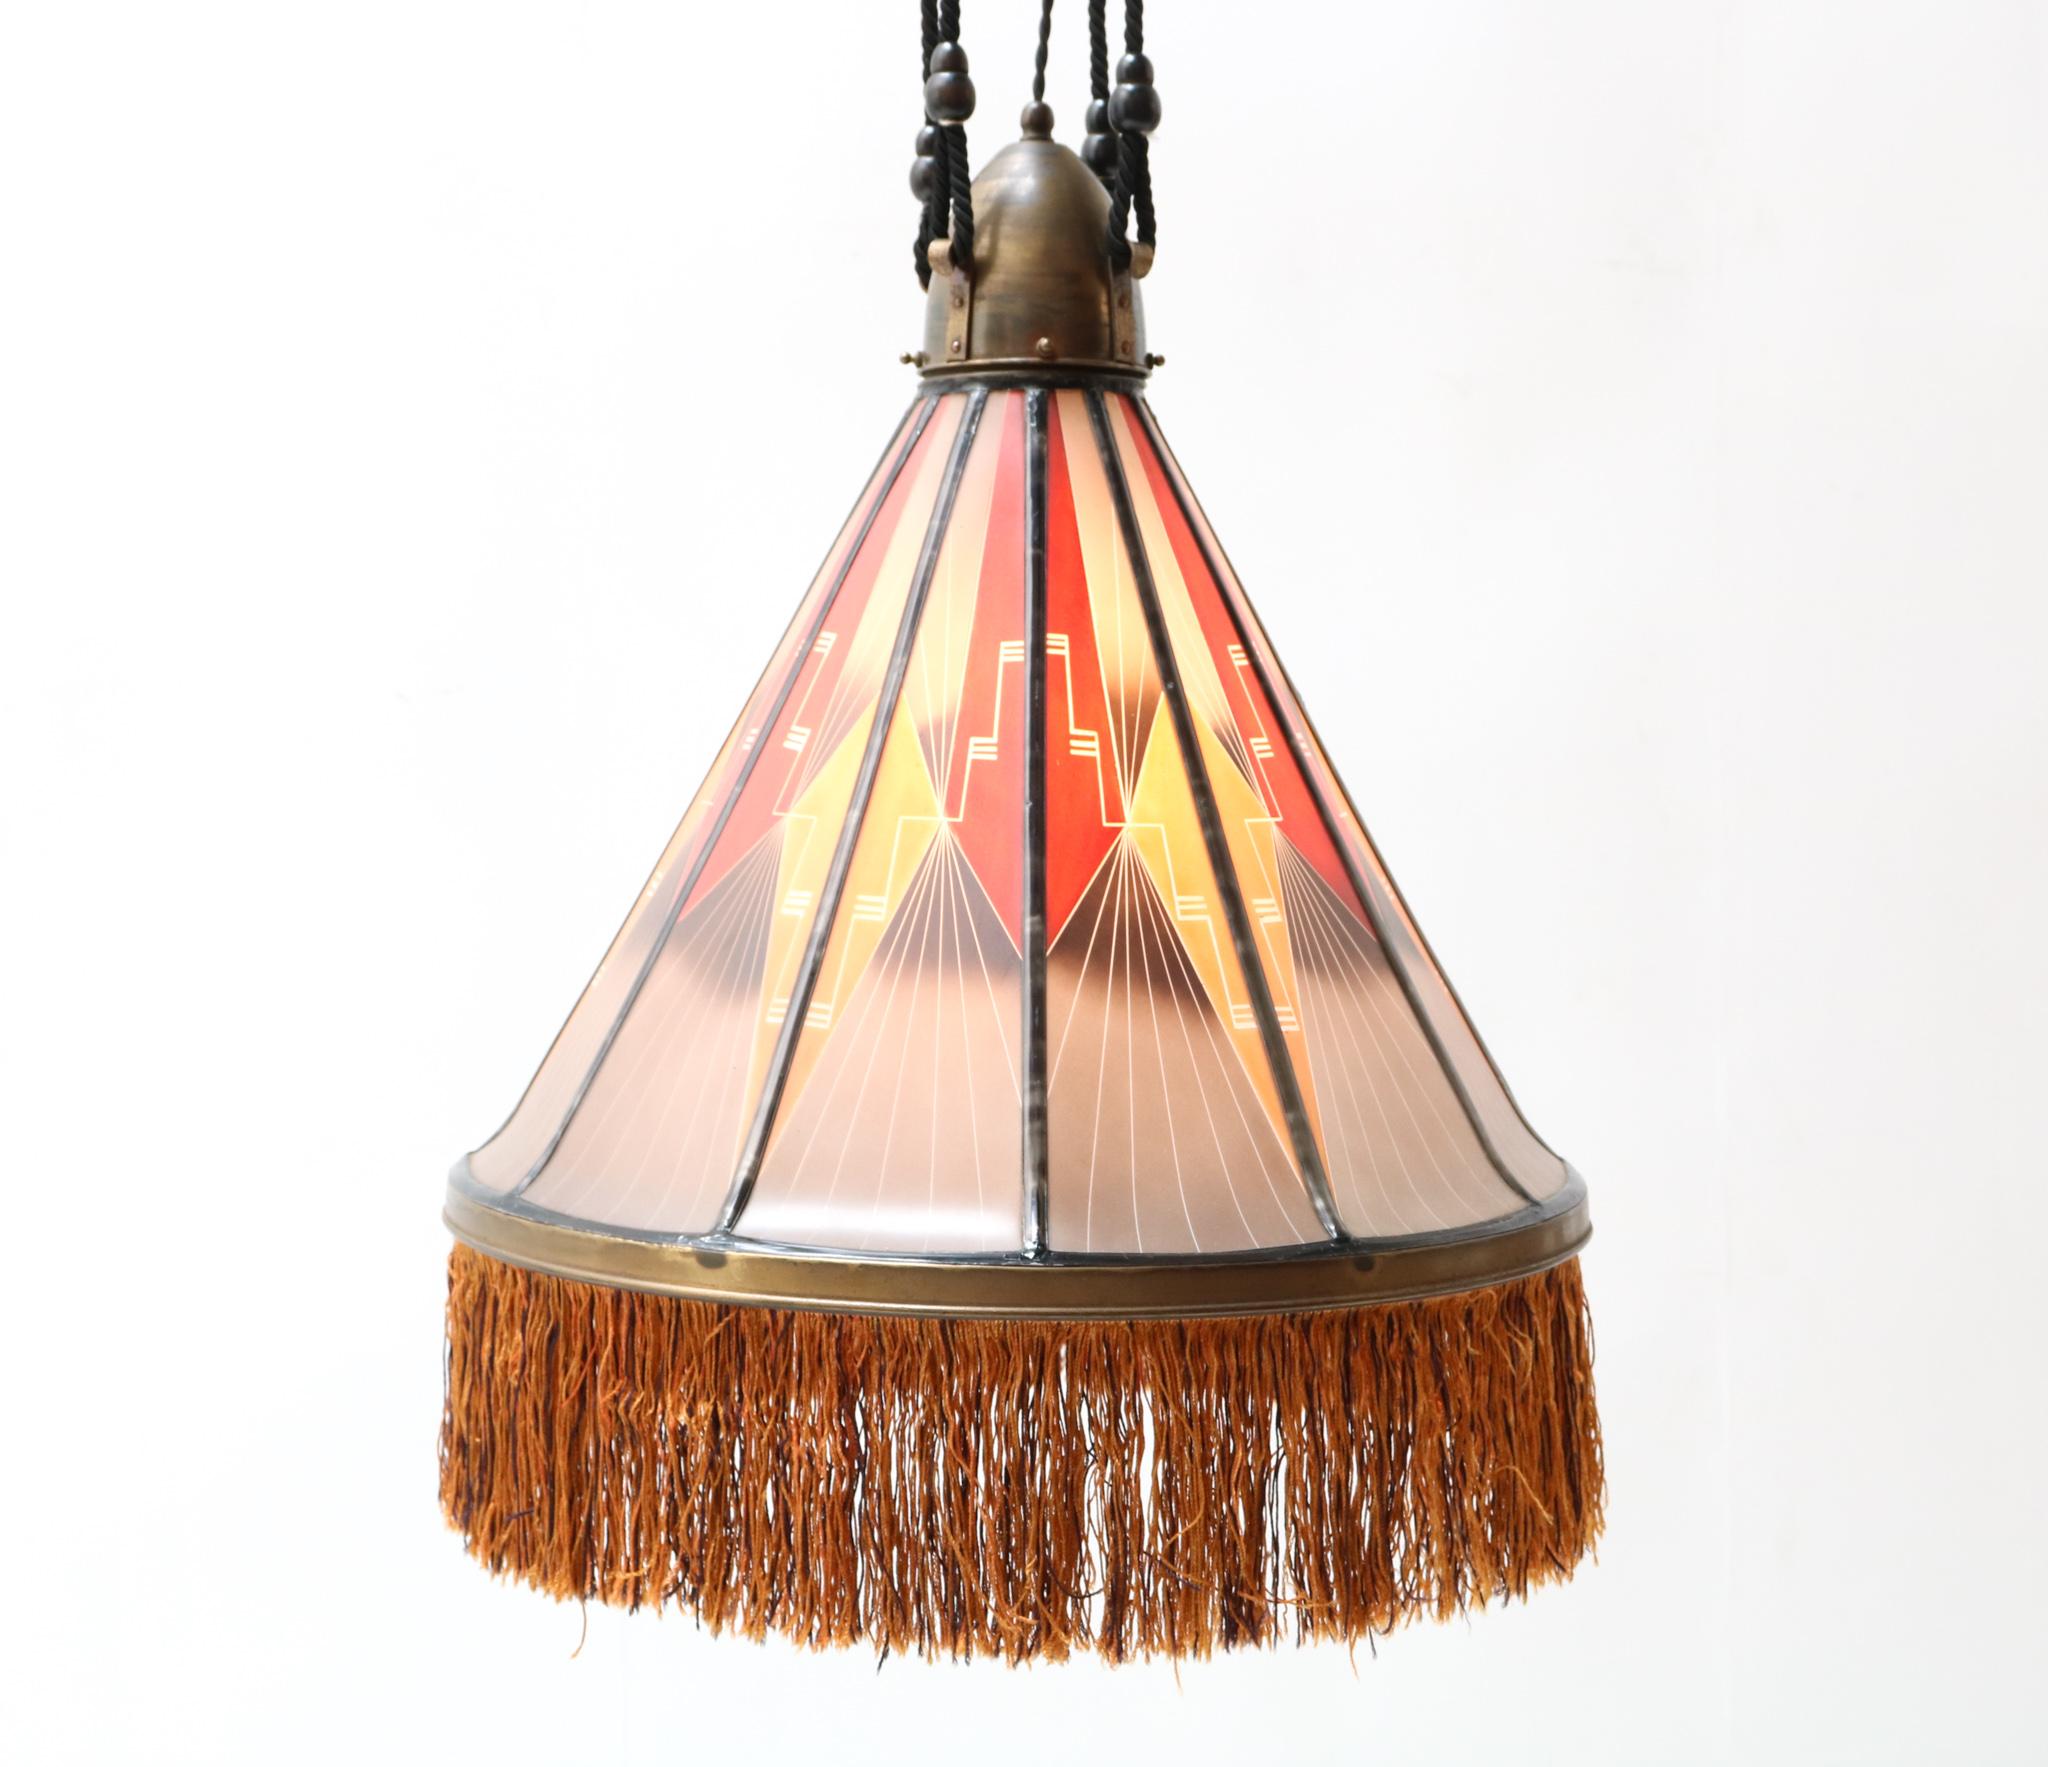 Amsterdamse School Stained Glass Chandelier by H.C. Herens for De Nieuwe Honsel 3